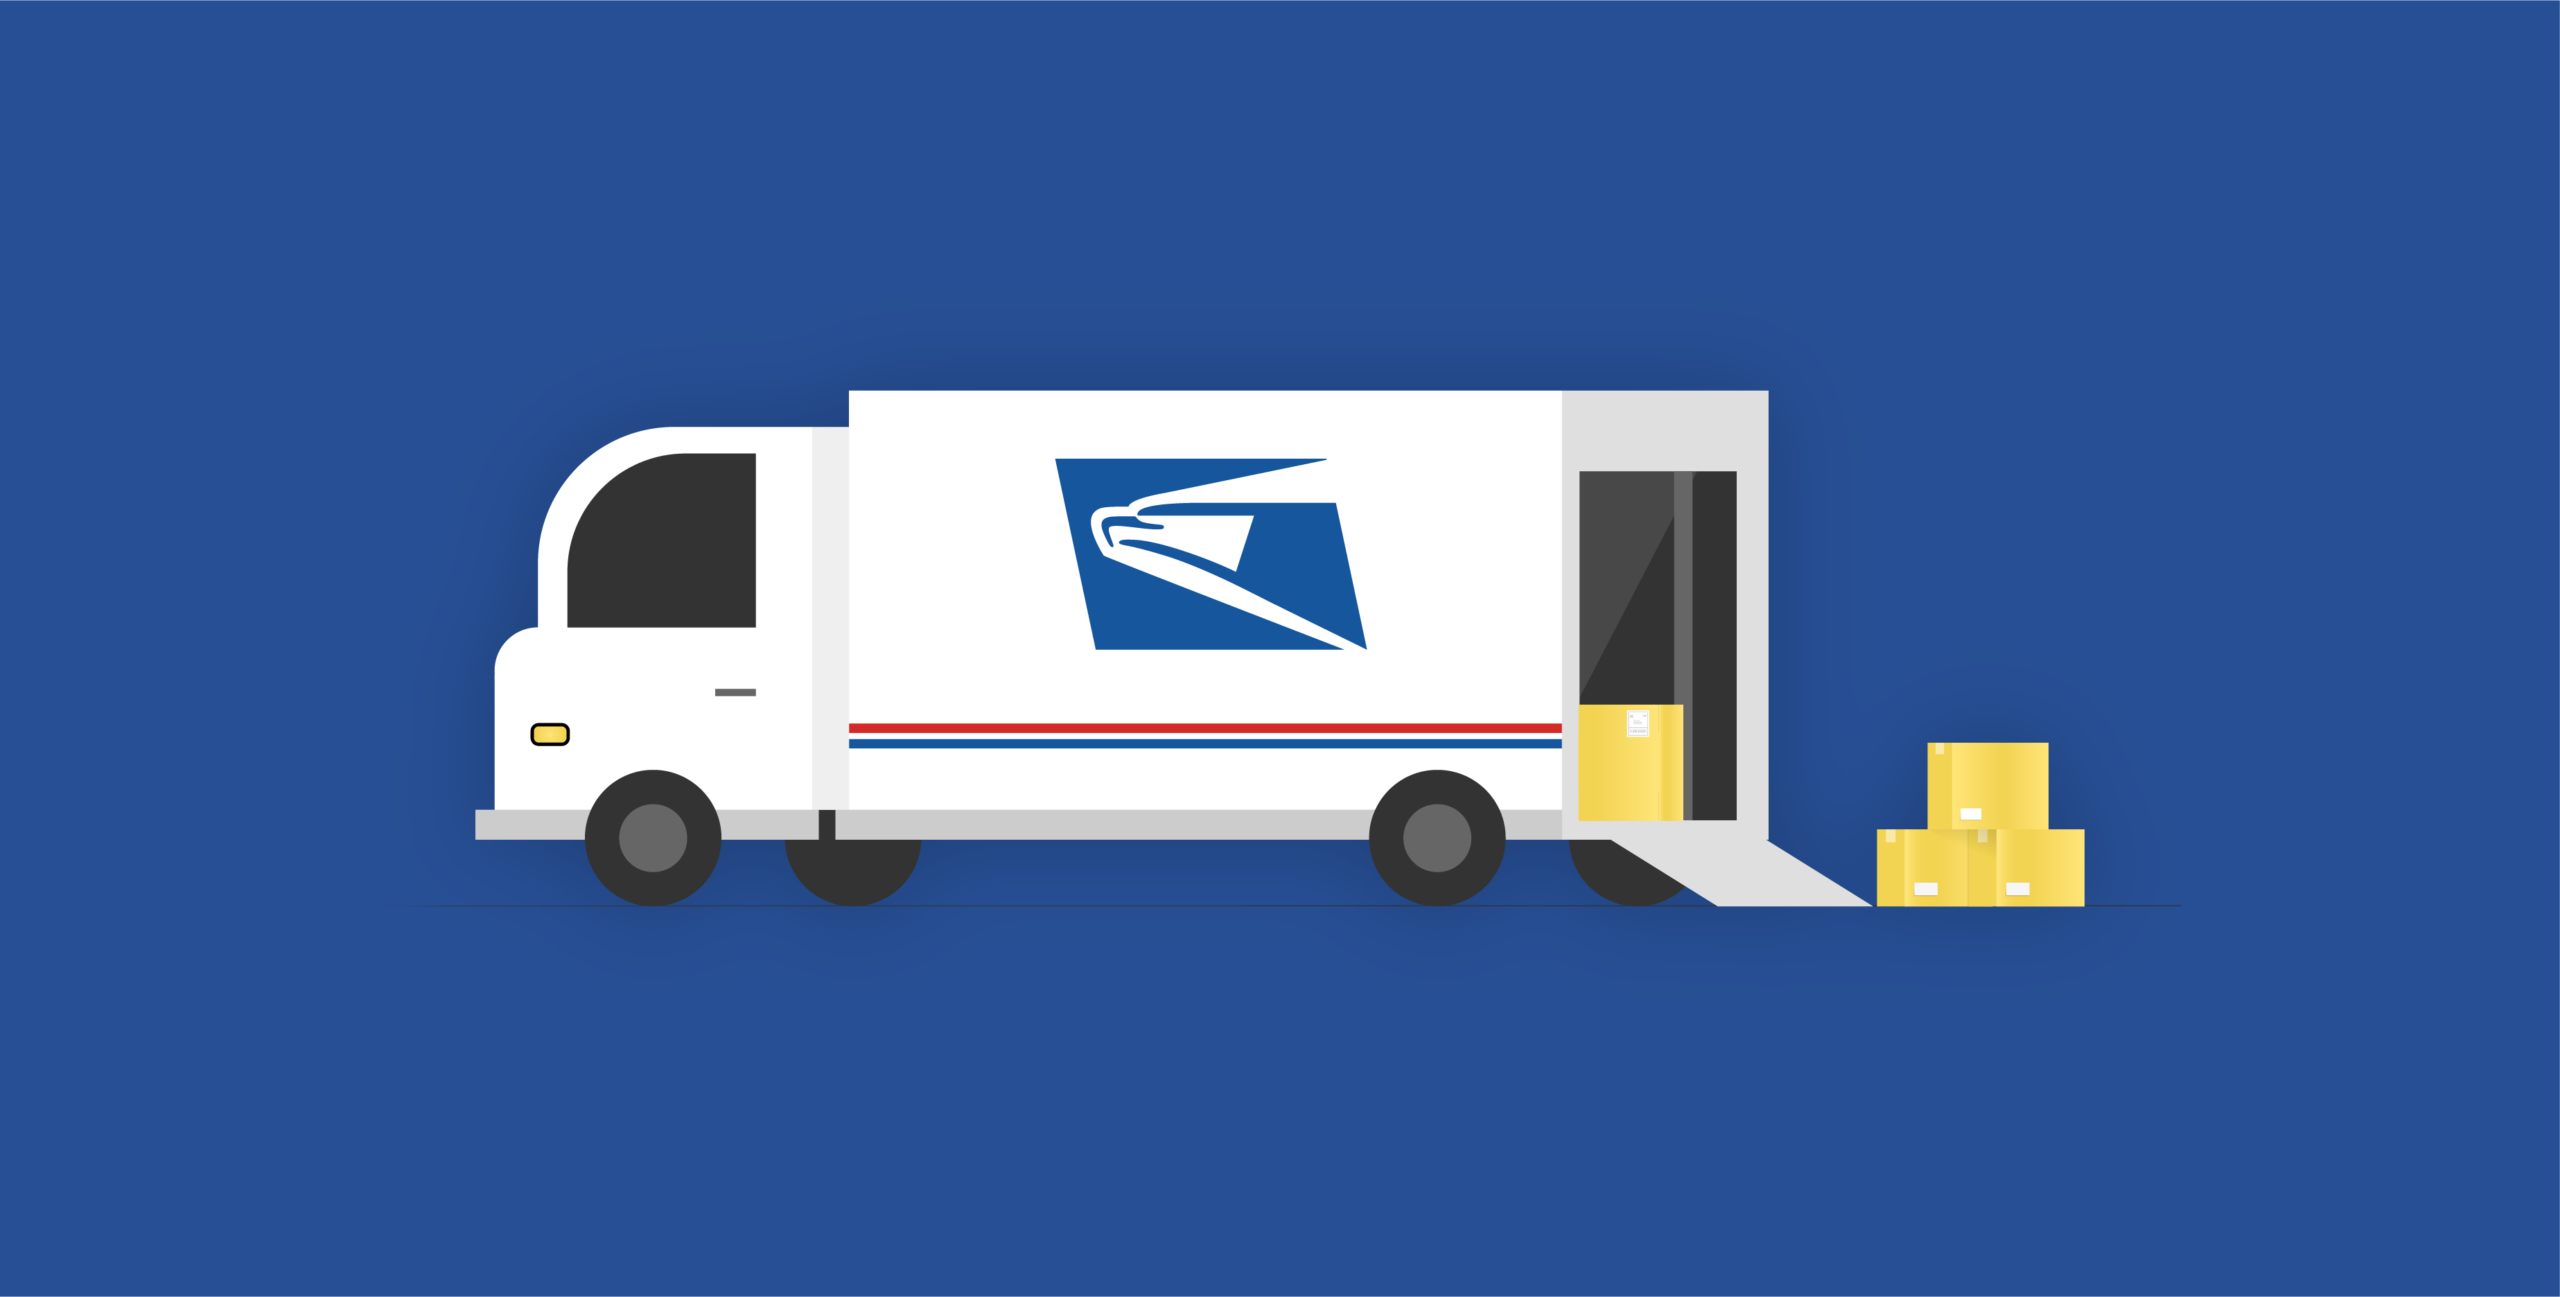 Usps 2019 First Class Shipping Rates Shippingeasy Information about tracking number : usps 2019 first class shipping rates